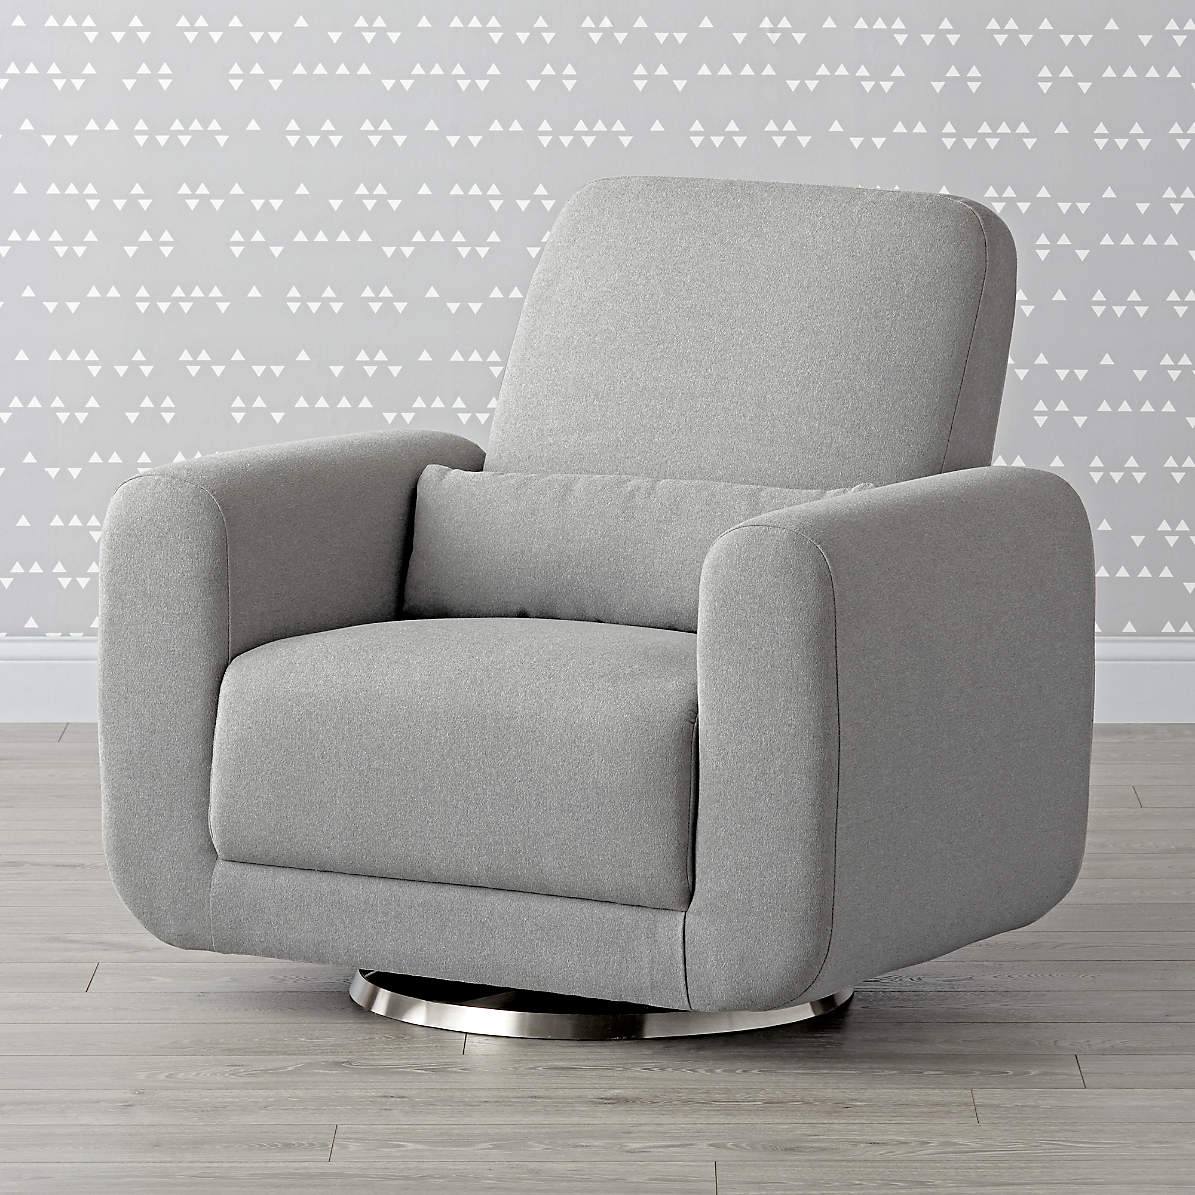 Babyletto Tuba Swivel Glider Chair and 